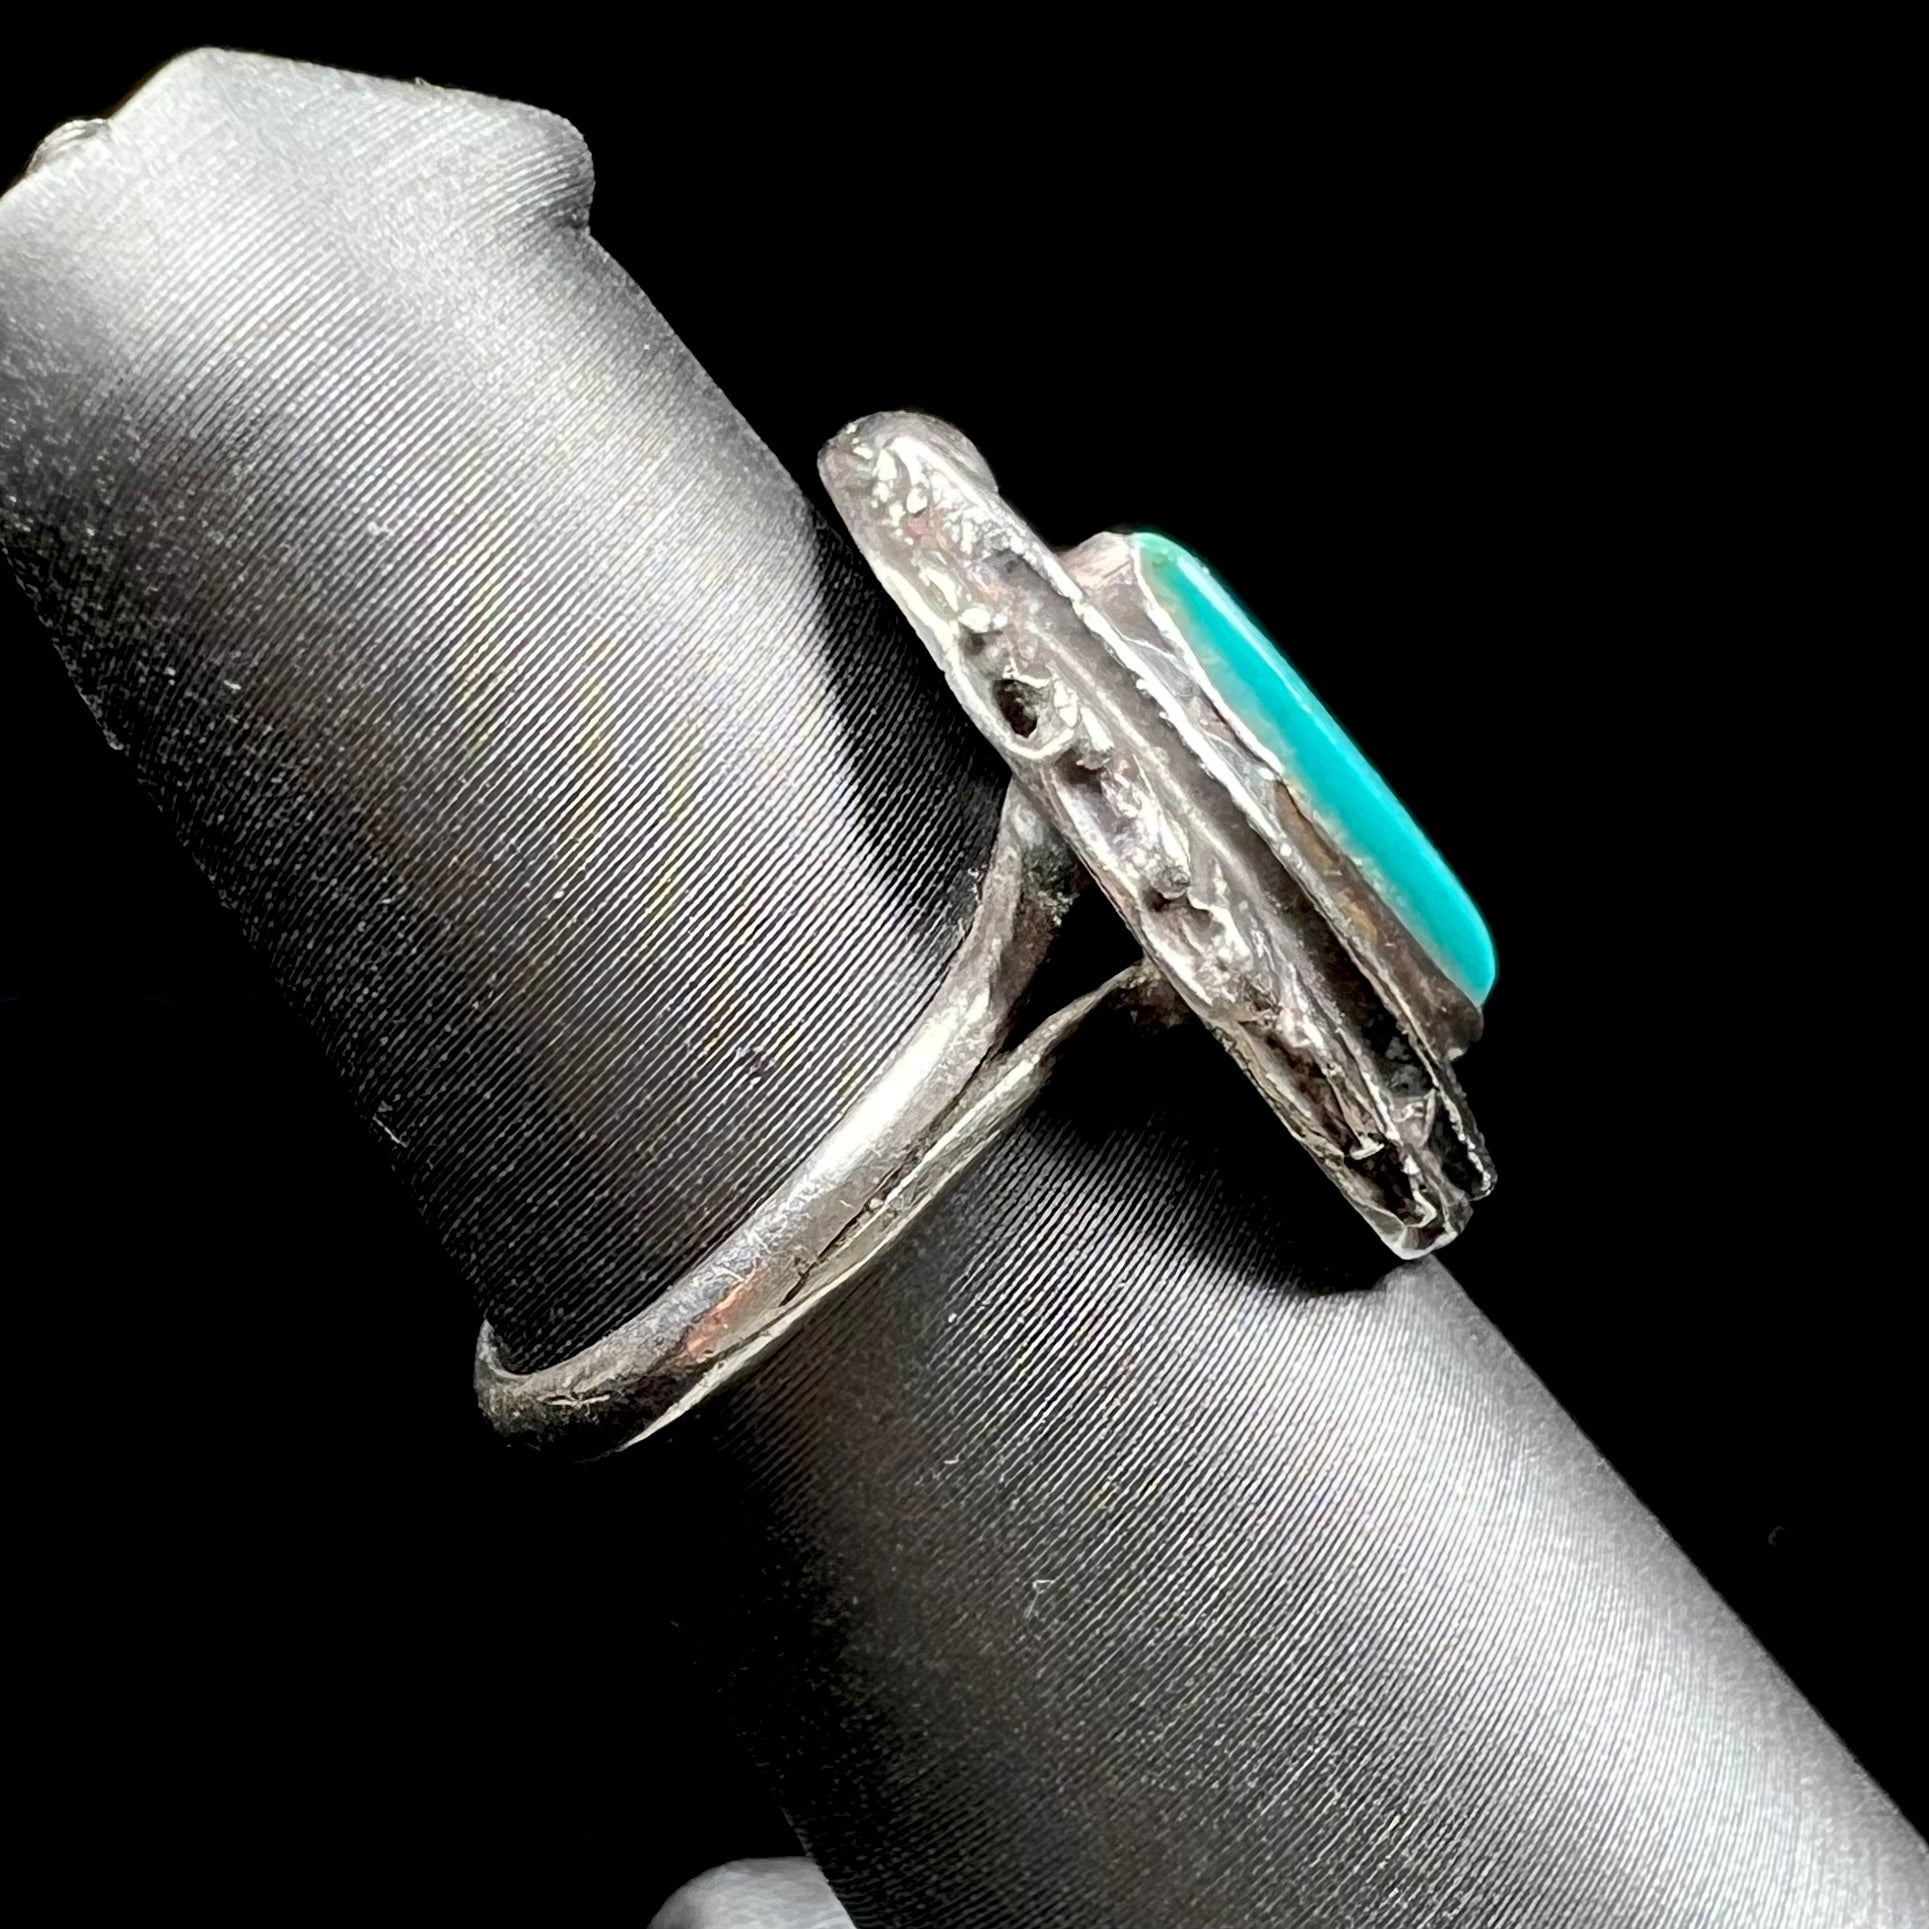 A ladies' sterling silver feather style ring set with a marquise cut turquoise stone.